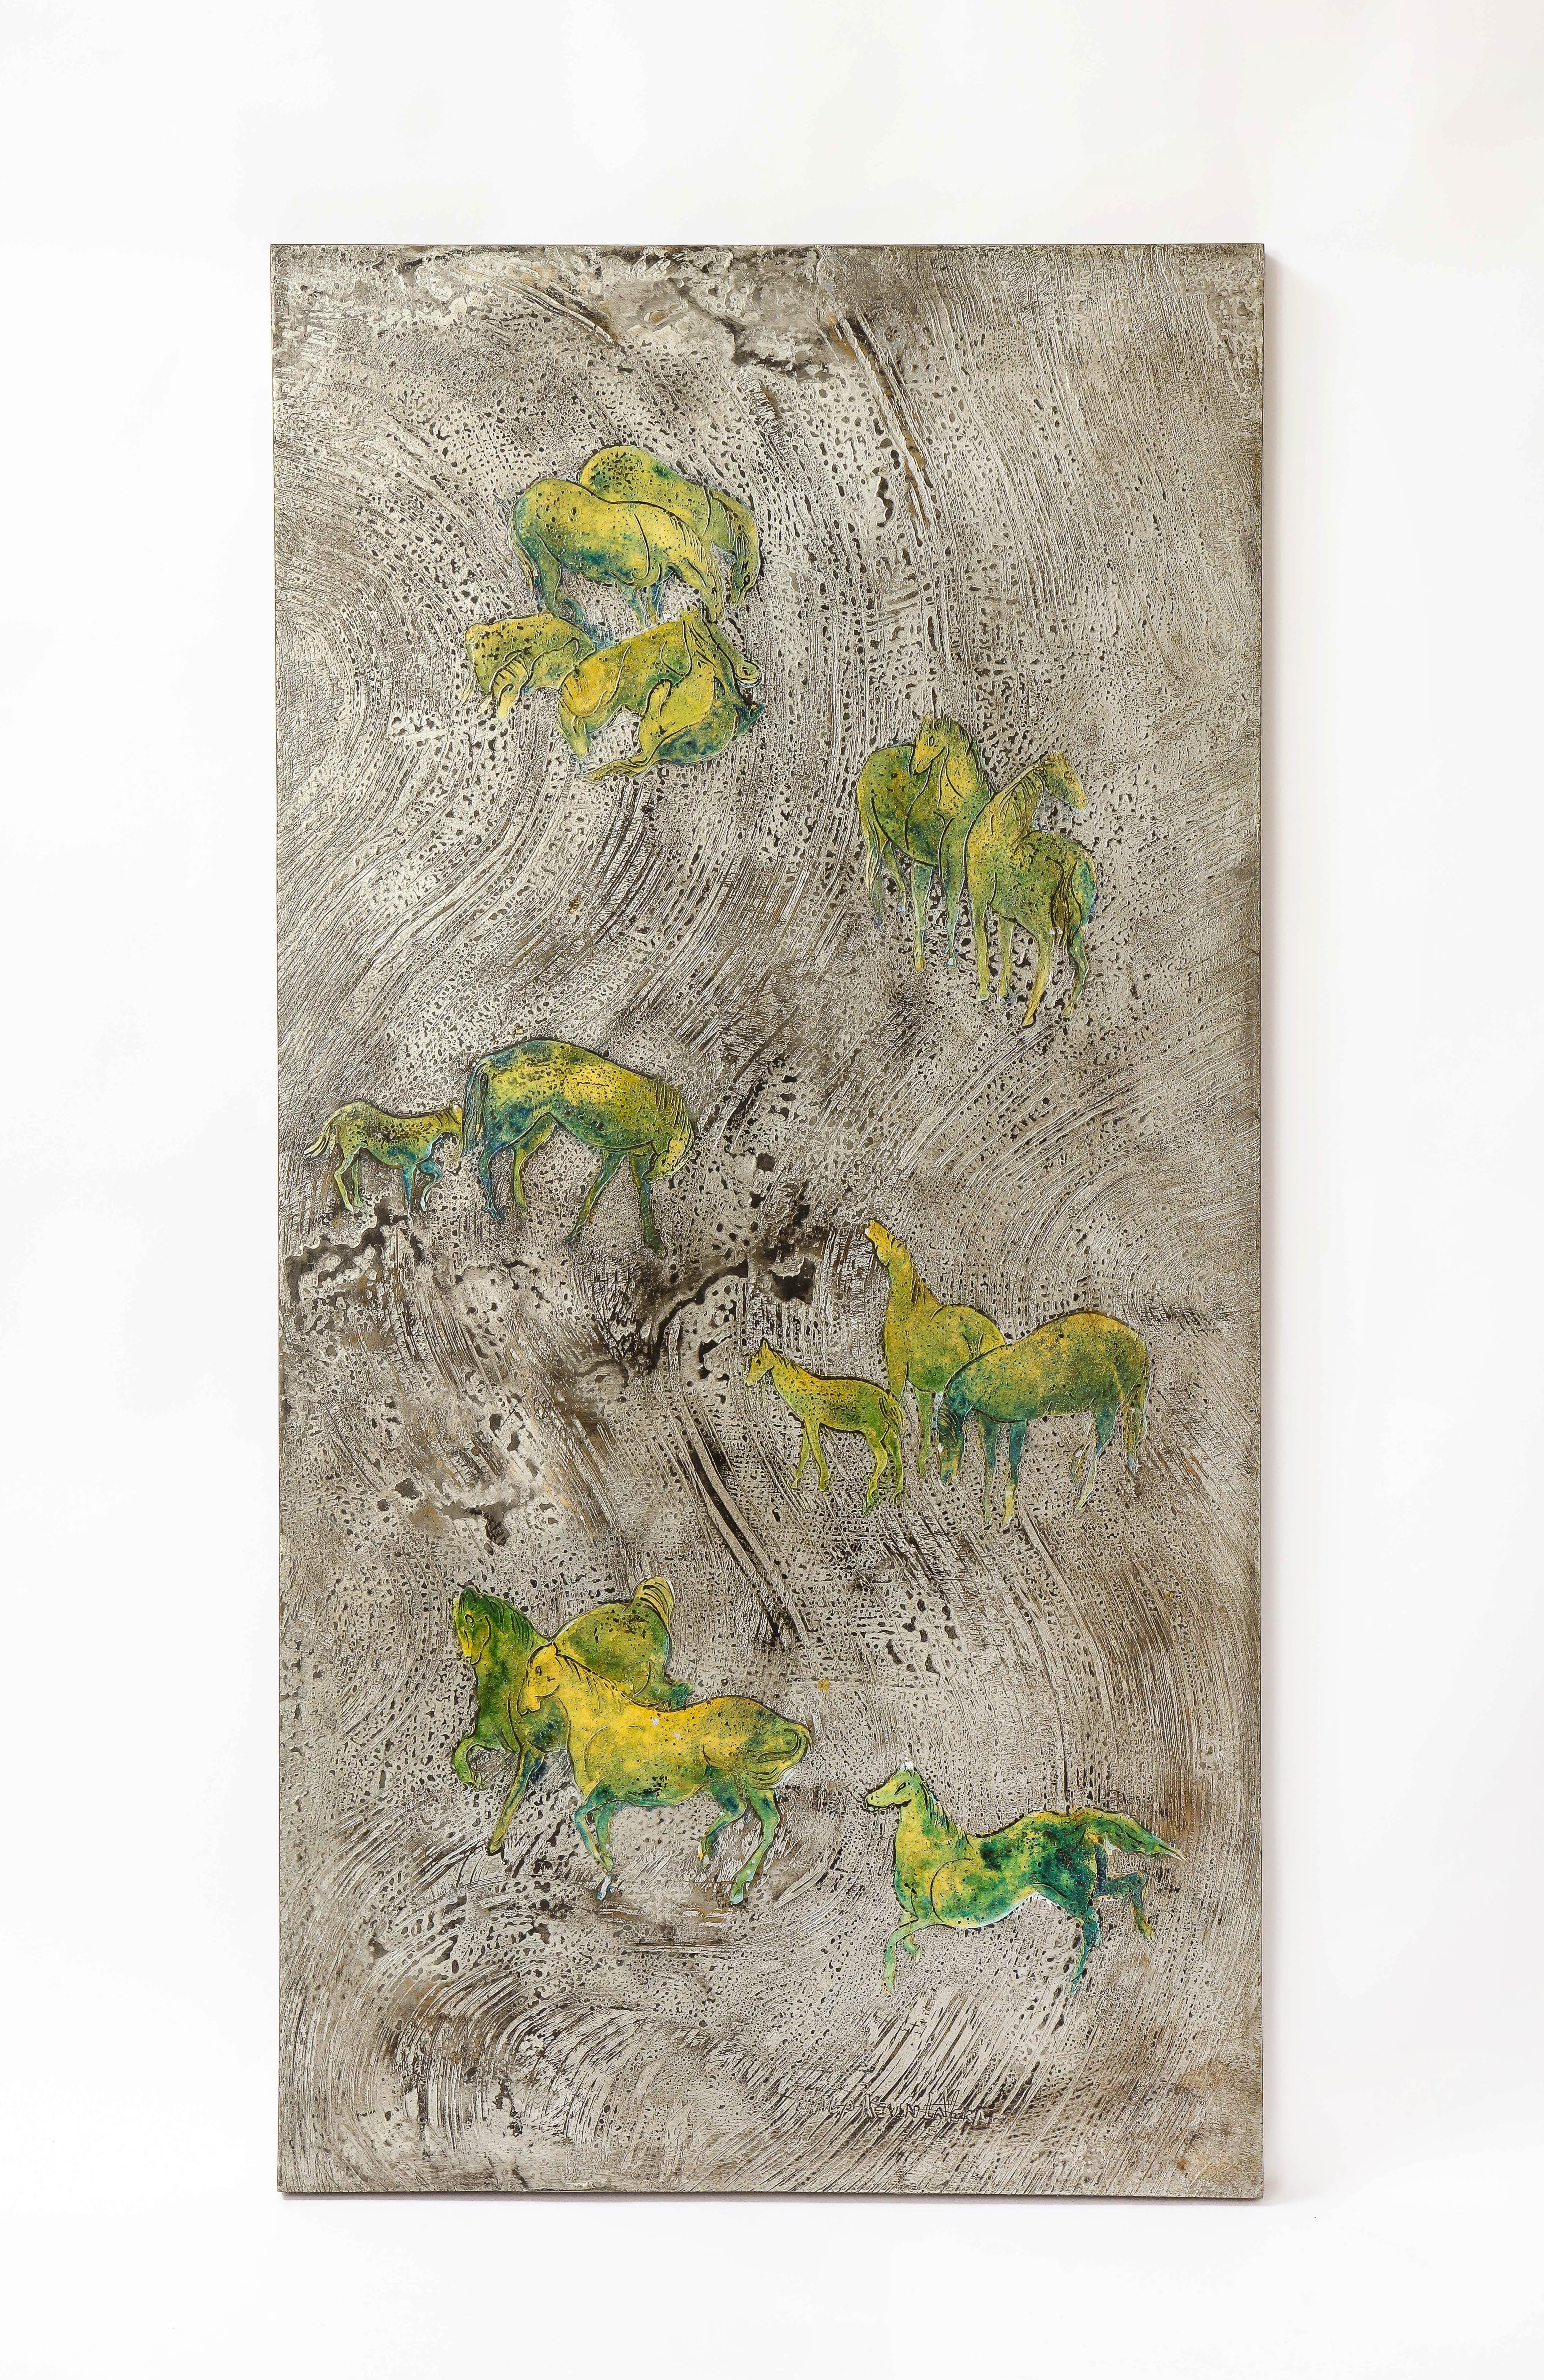 A fantastic and quite rare acid etched metal panel of green iridescent horses on a silver ground, Signed Philip and Kelvin LaVerne. This is one of the rarer signed LaVerne pieces, due to its size, unusual design, and beautiful vibrant colorway.